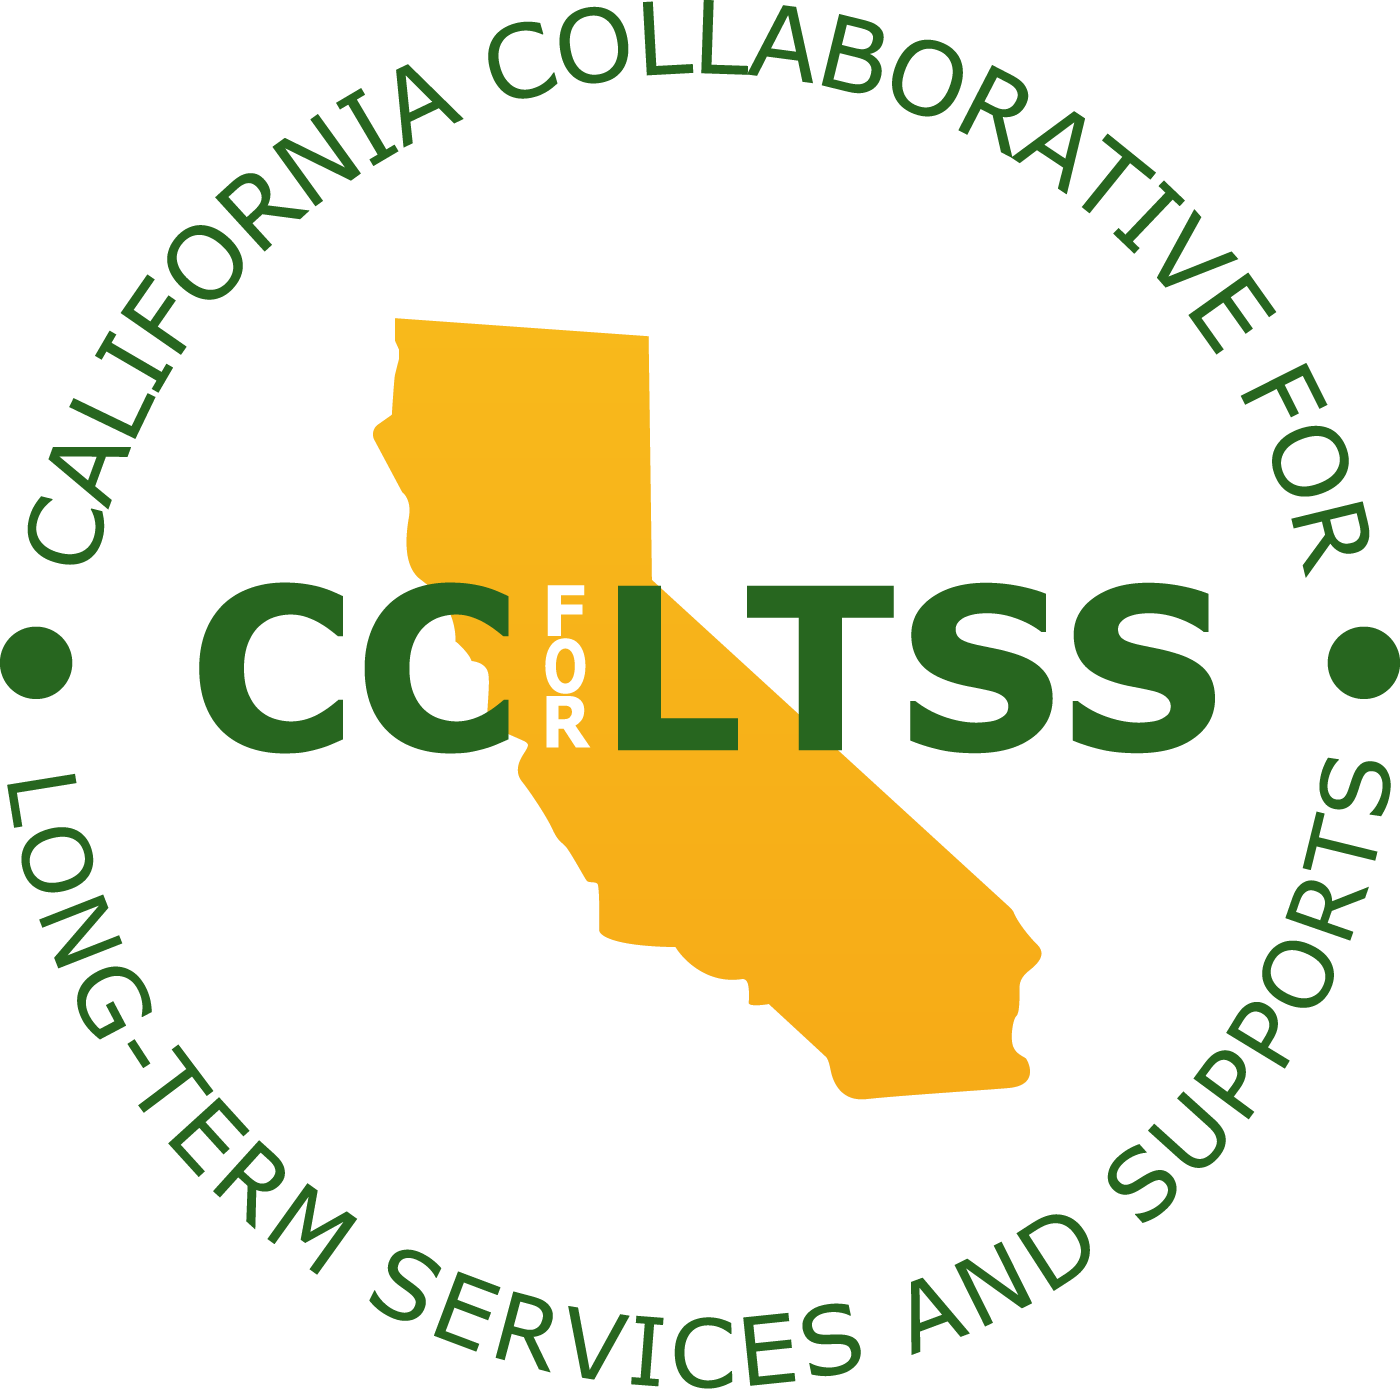 Logo of California Collaborative for Long Term Services & Support (CCLTSS).